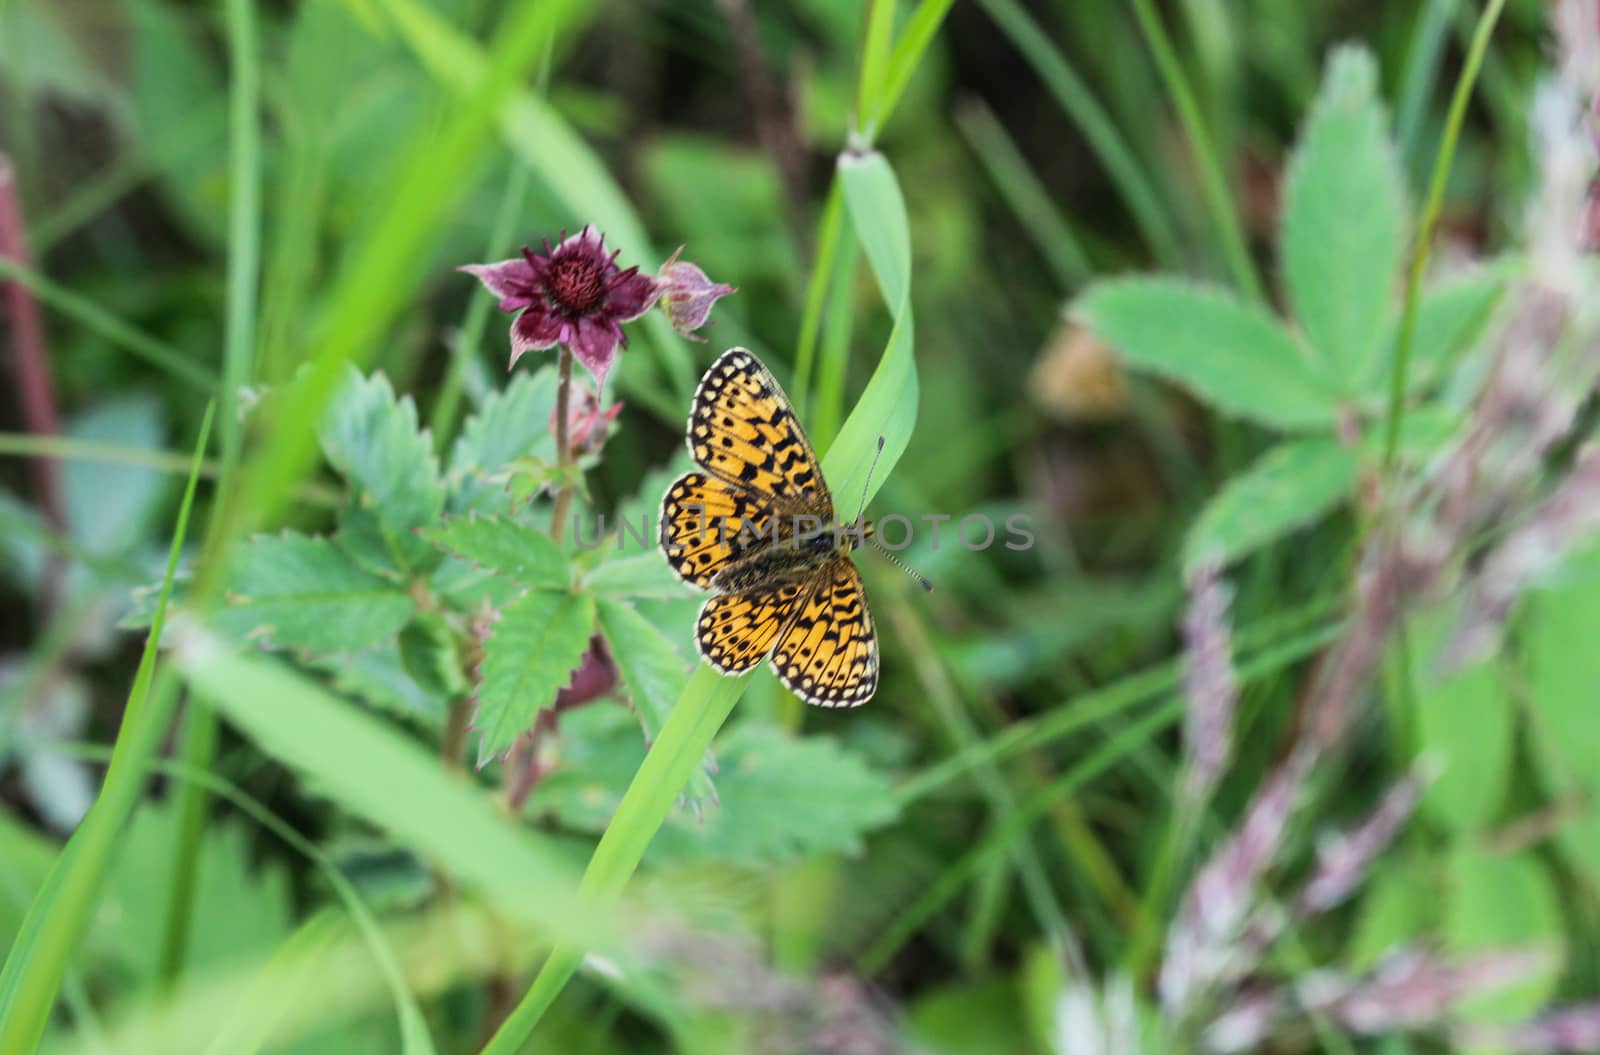 Close up of Boloria eunomia, the bog fritillary or ocellate bog fritillary butterfly of the family Nymphalidae